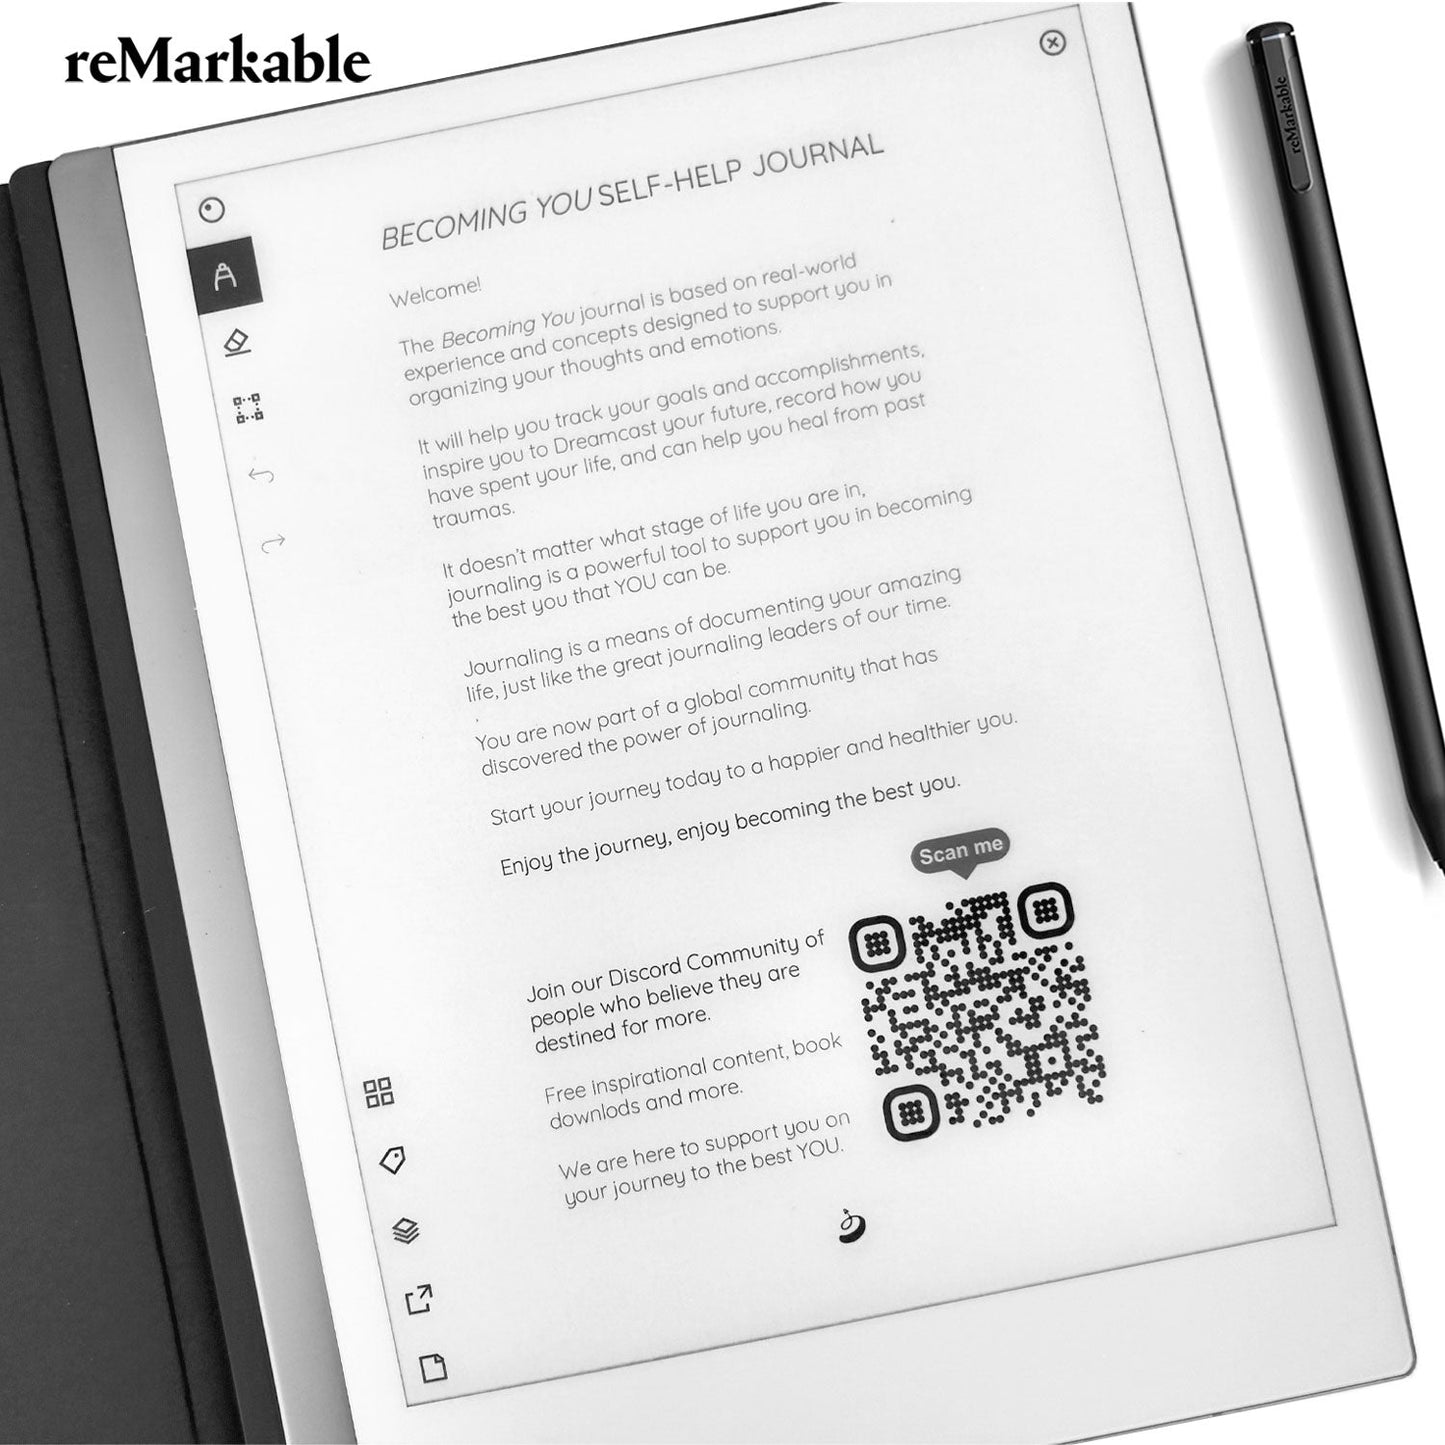 reMarkable - Guided Journal for Women - Digital Downloads